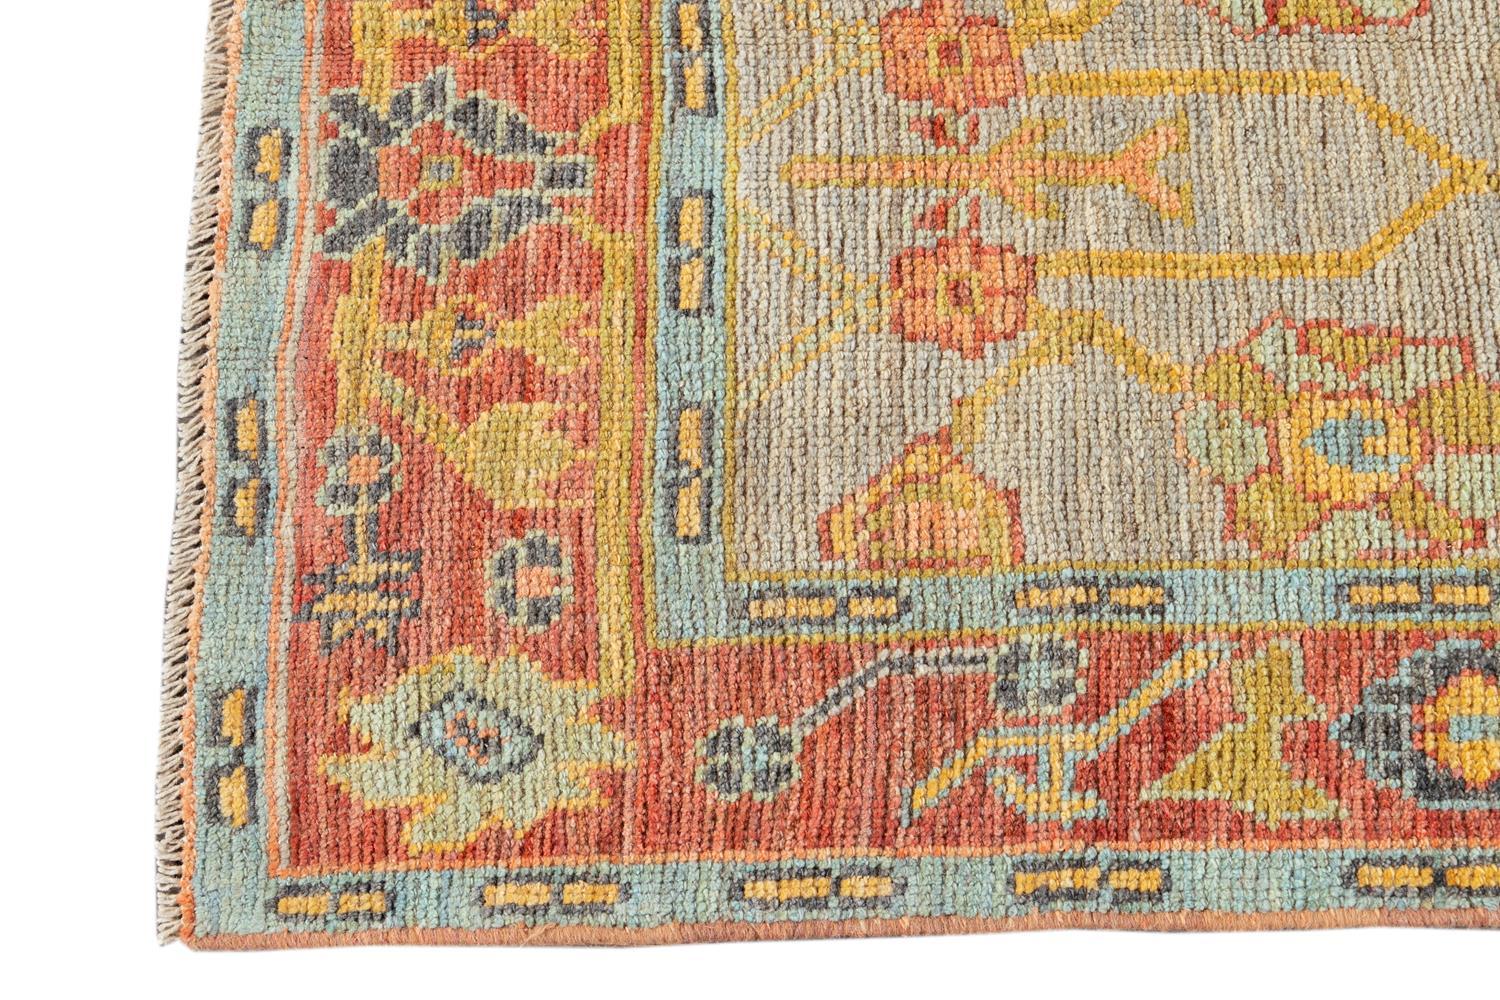 Beautiful hand knotted Modern Oushak rug, with a light gray field, rust, golden and blue accents in an all-over geometric floral design.

This rug measures 2' 7